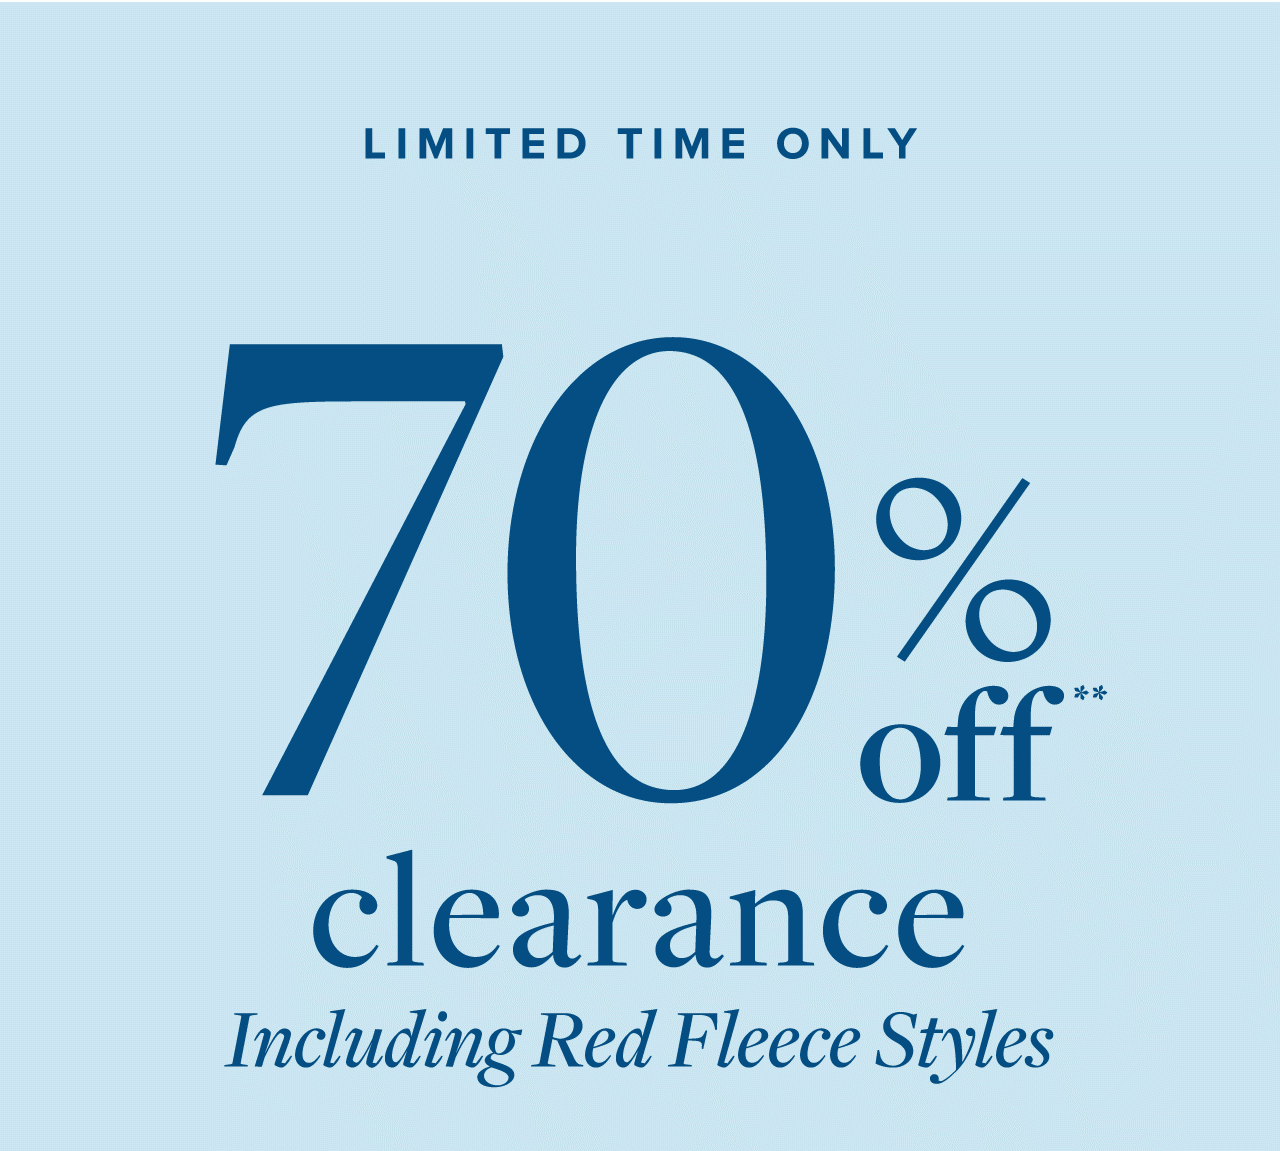 Limited Time Only 70% off clearance Including Red Fleece Styles